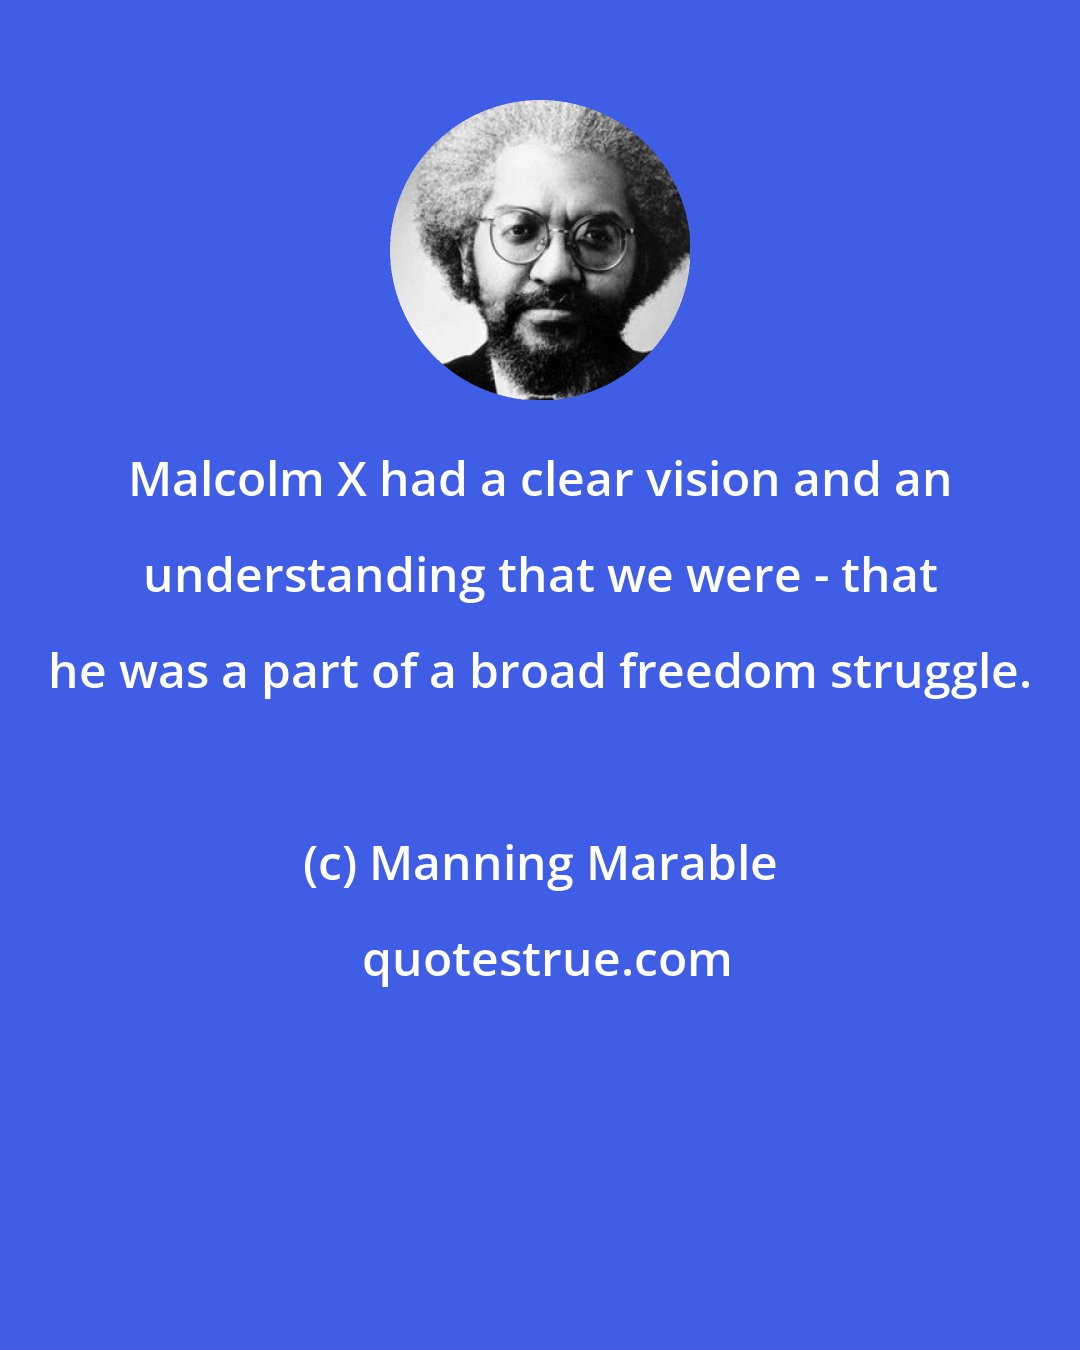 Manning Marable: Malcolm X had a clear vision and an understanding that we were - that he was a part of a broad freedom struggle.